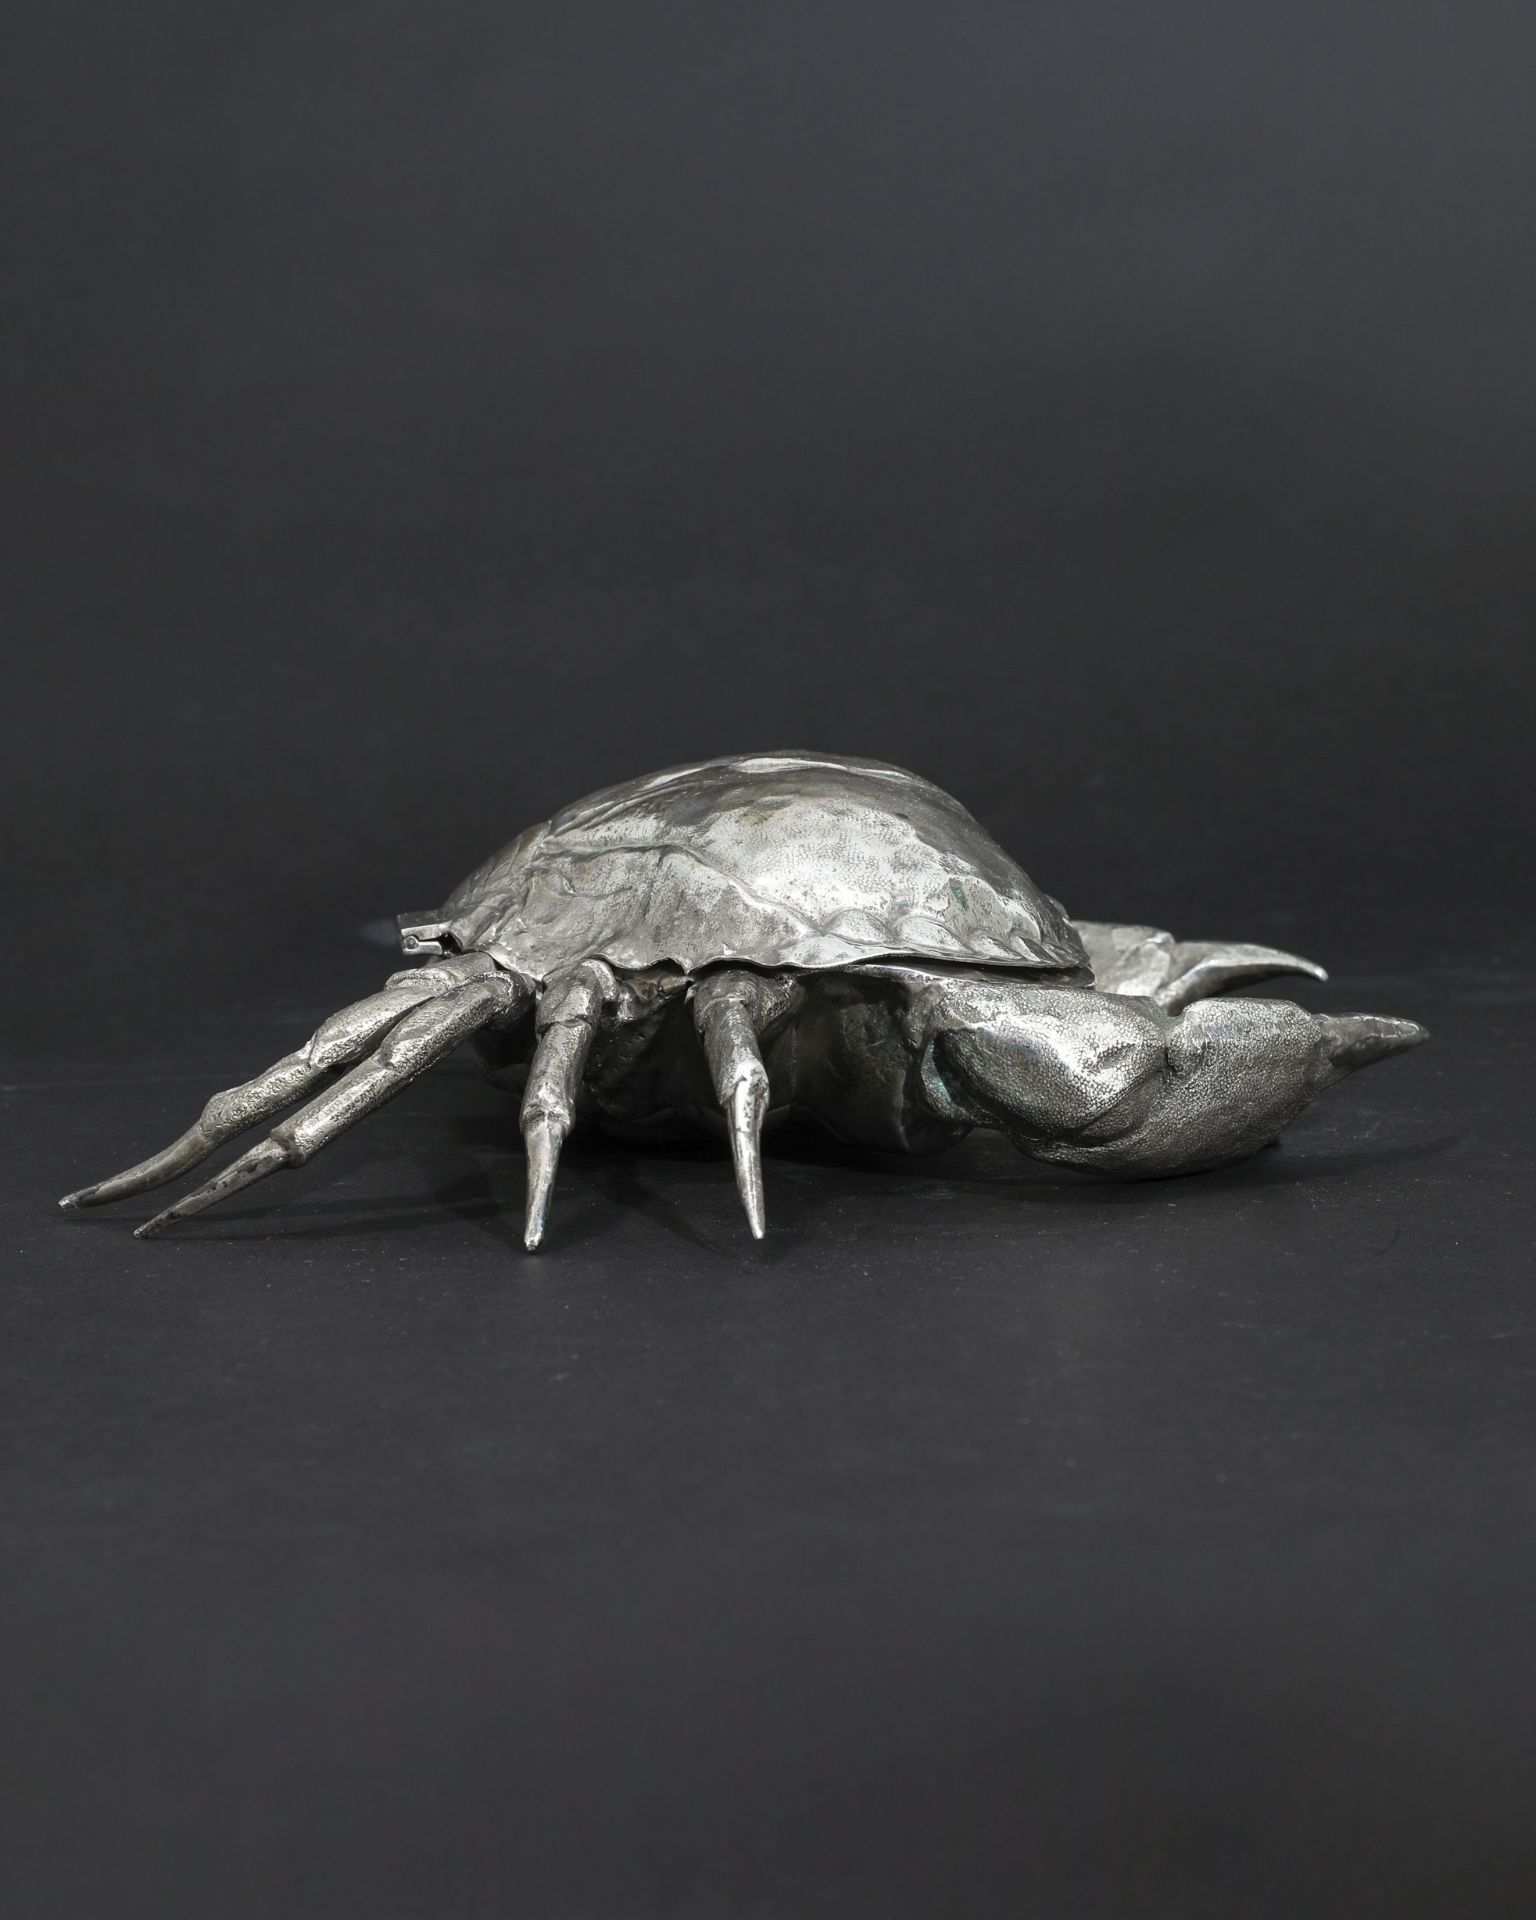 Franco Lapini, King Crab Caviar Bowl, Silver plated, Italy 1970s - Image 4 of 6